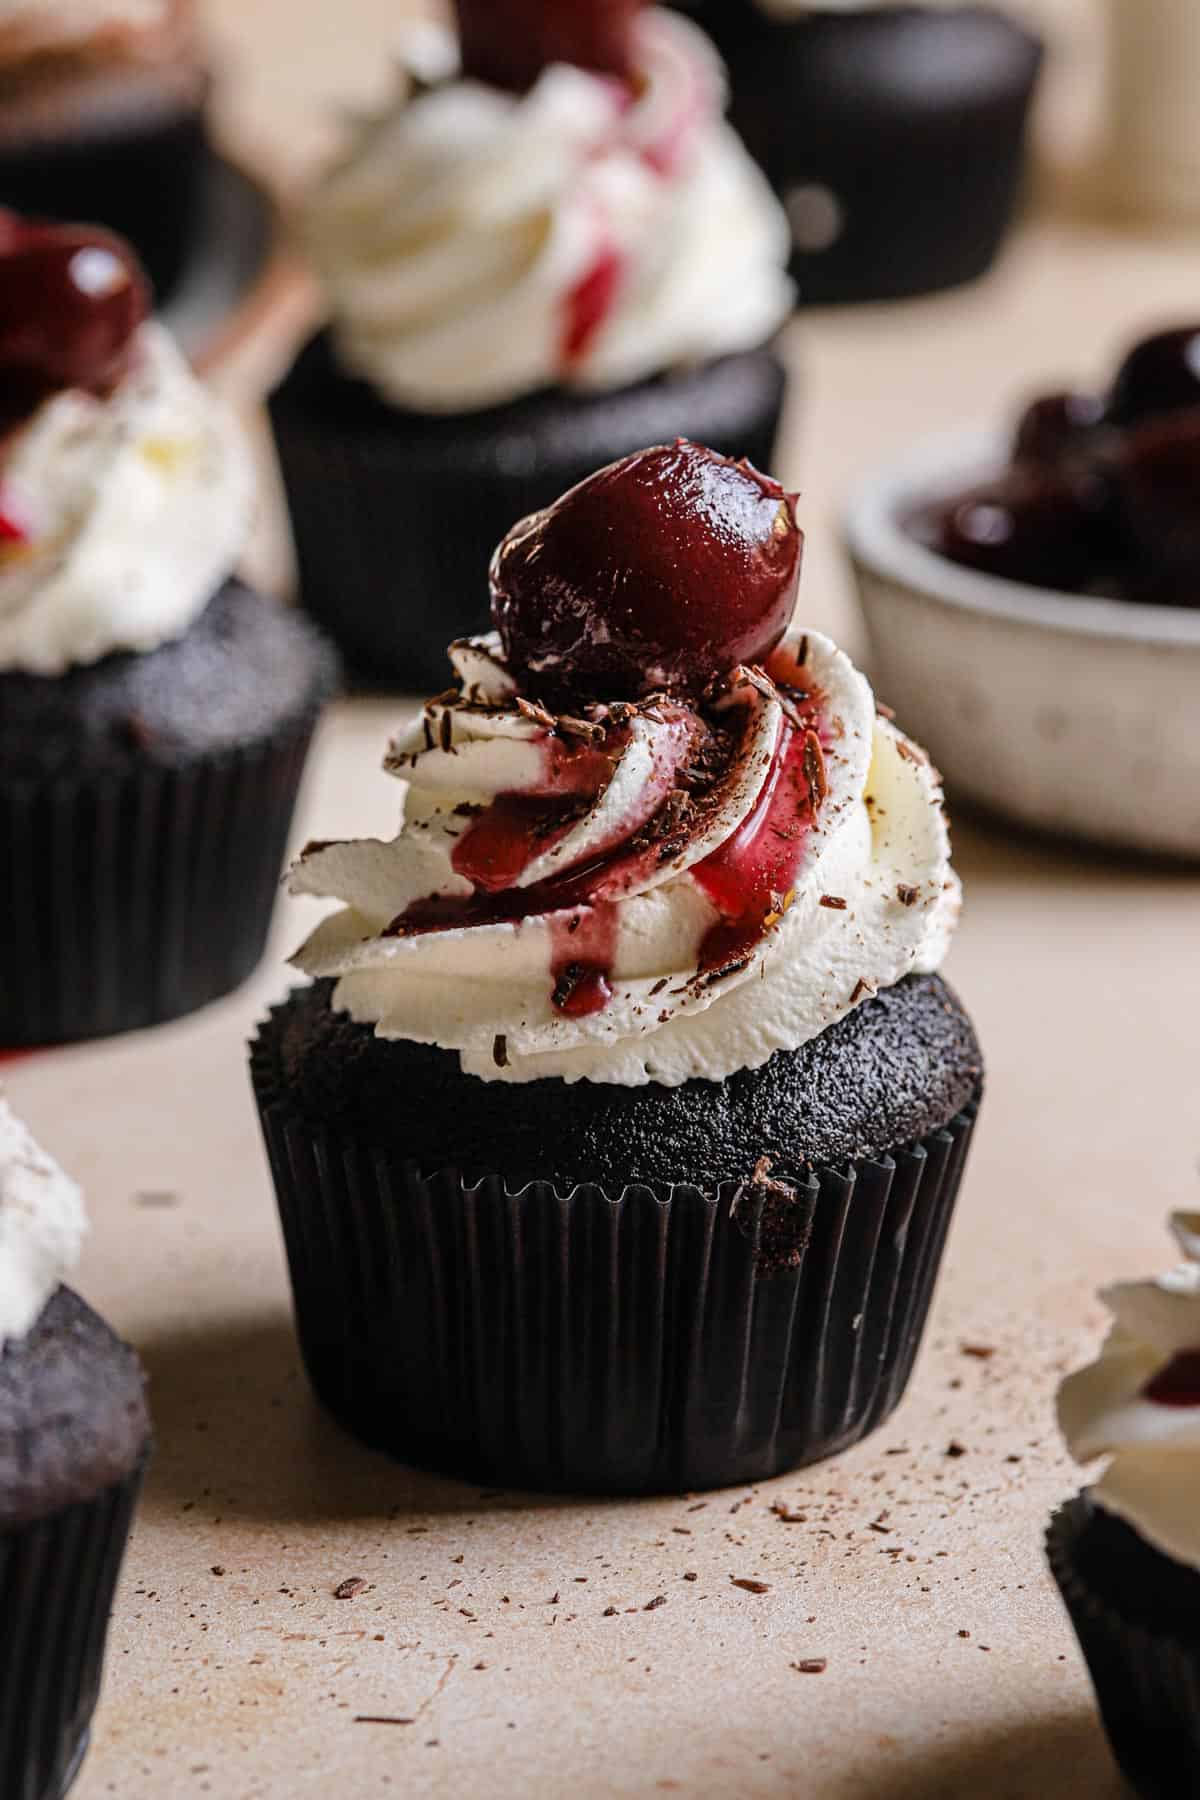 Chocolate cupcake filled with cherry filling and topped with whipped heavy cream